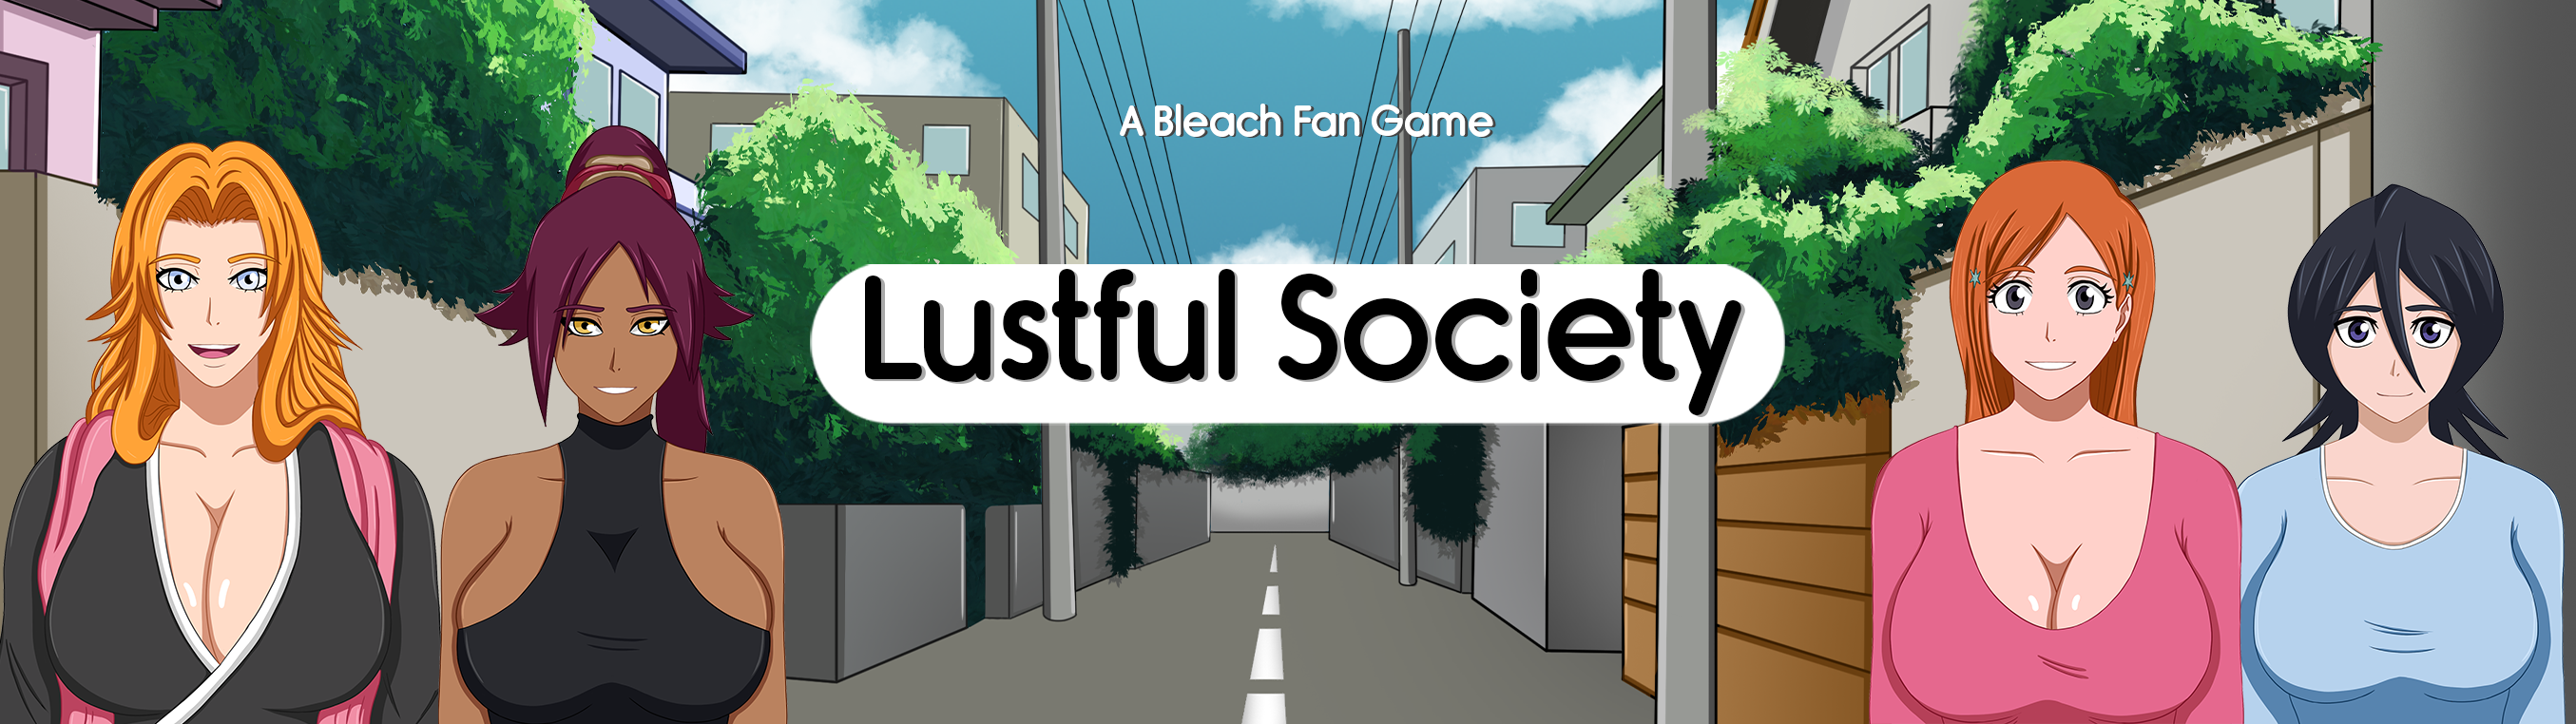 Lustful Society1.png